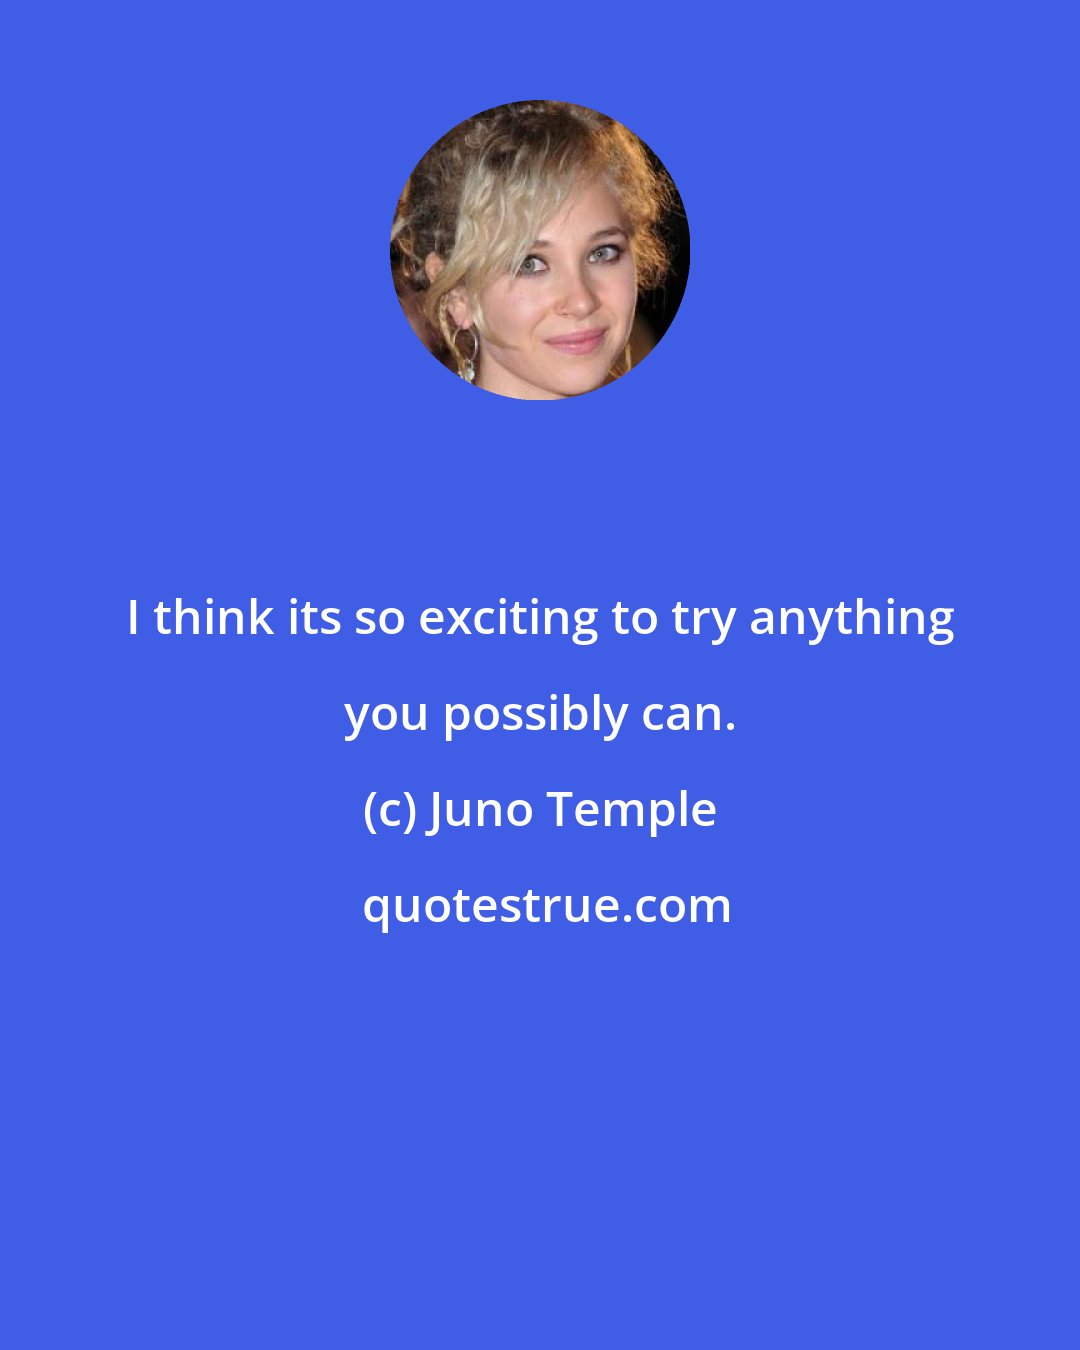 Juno Temple: I think its so exciting to try anything you possibly can.